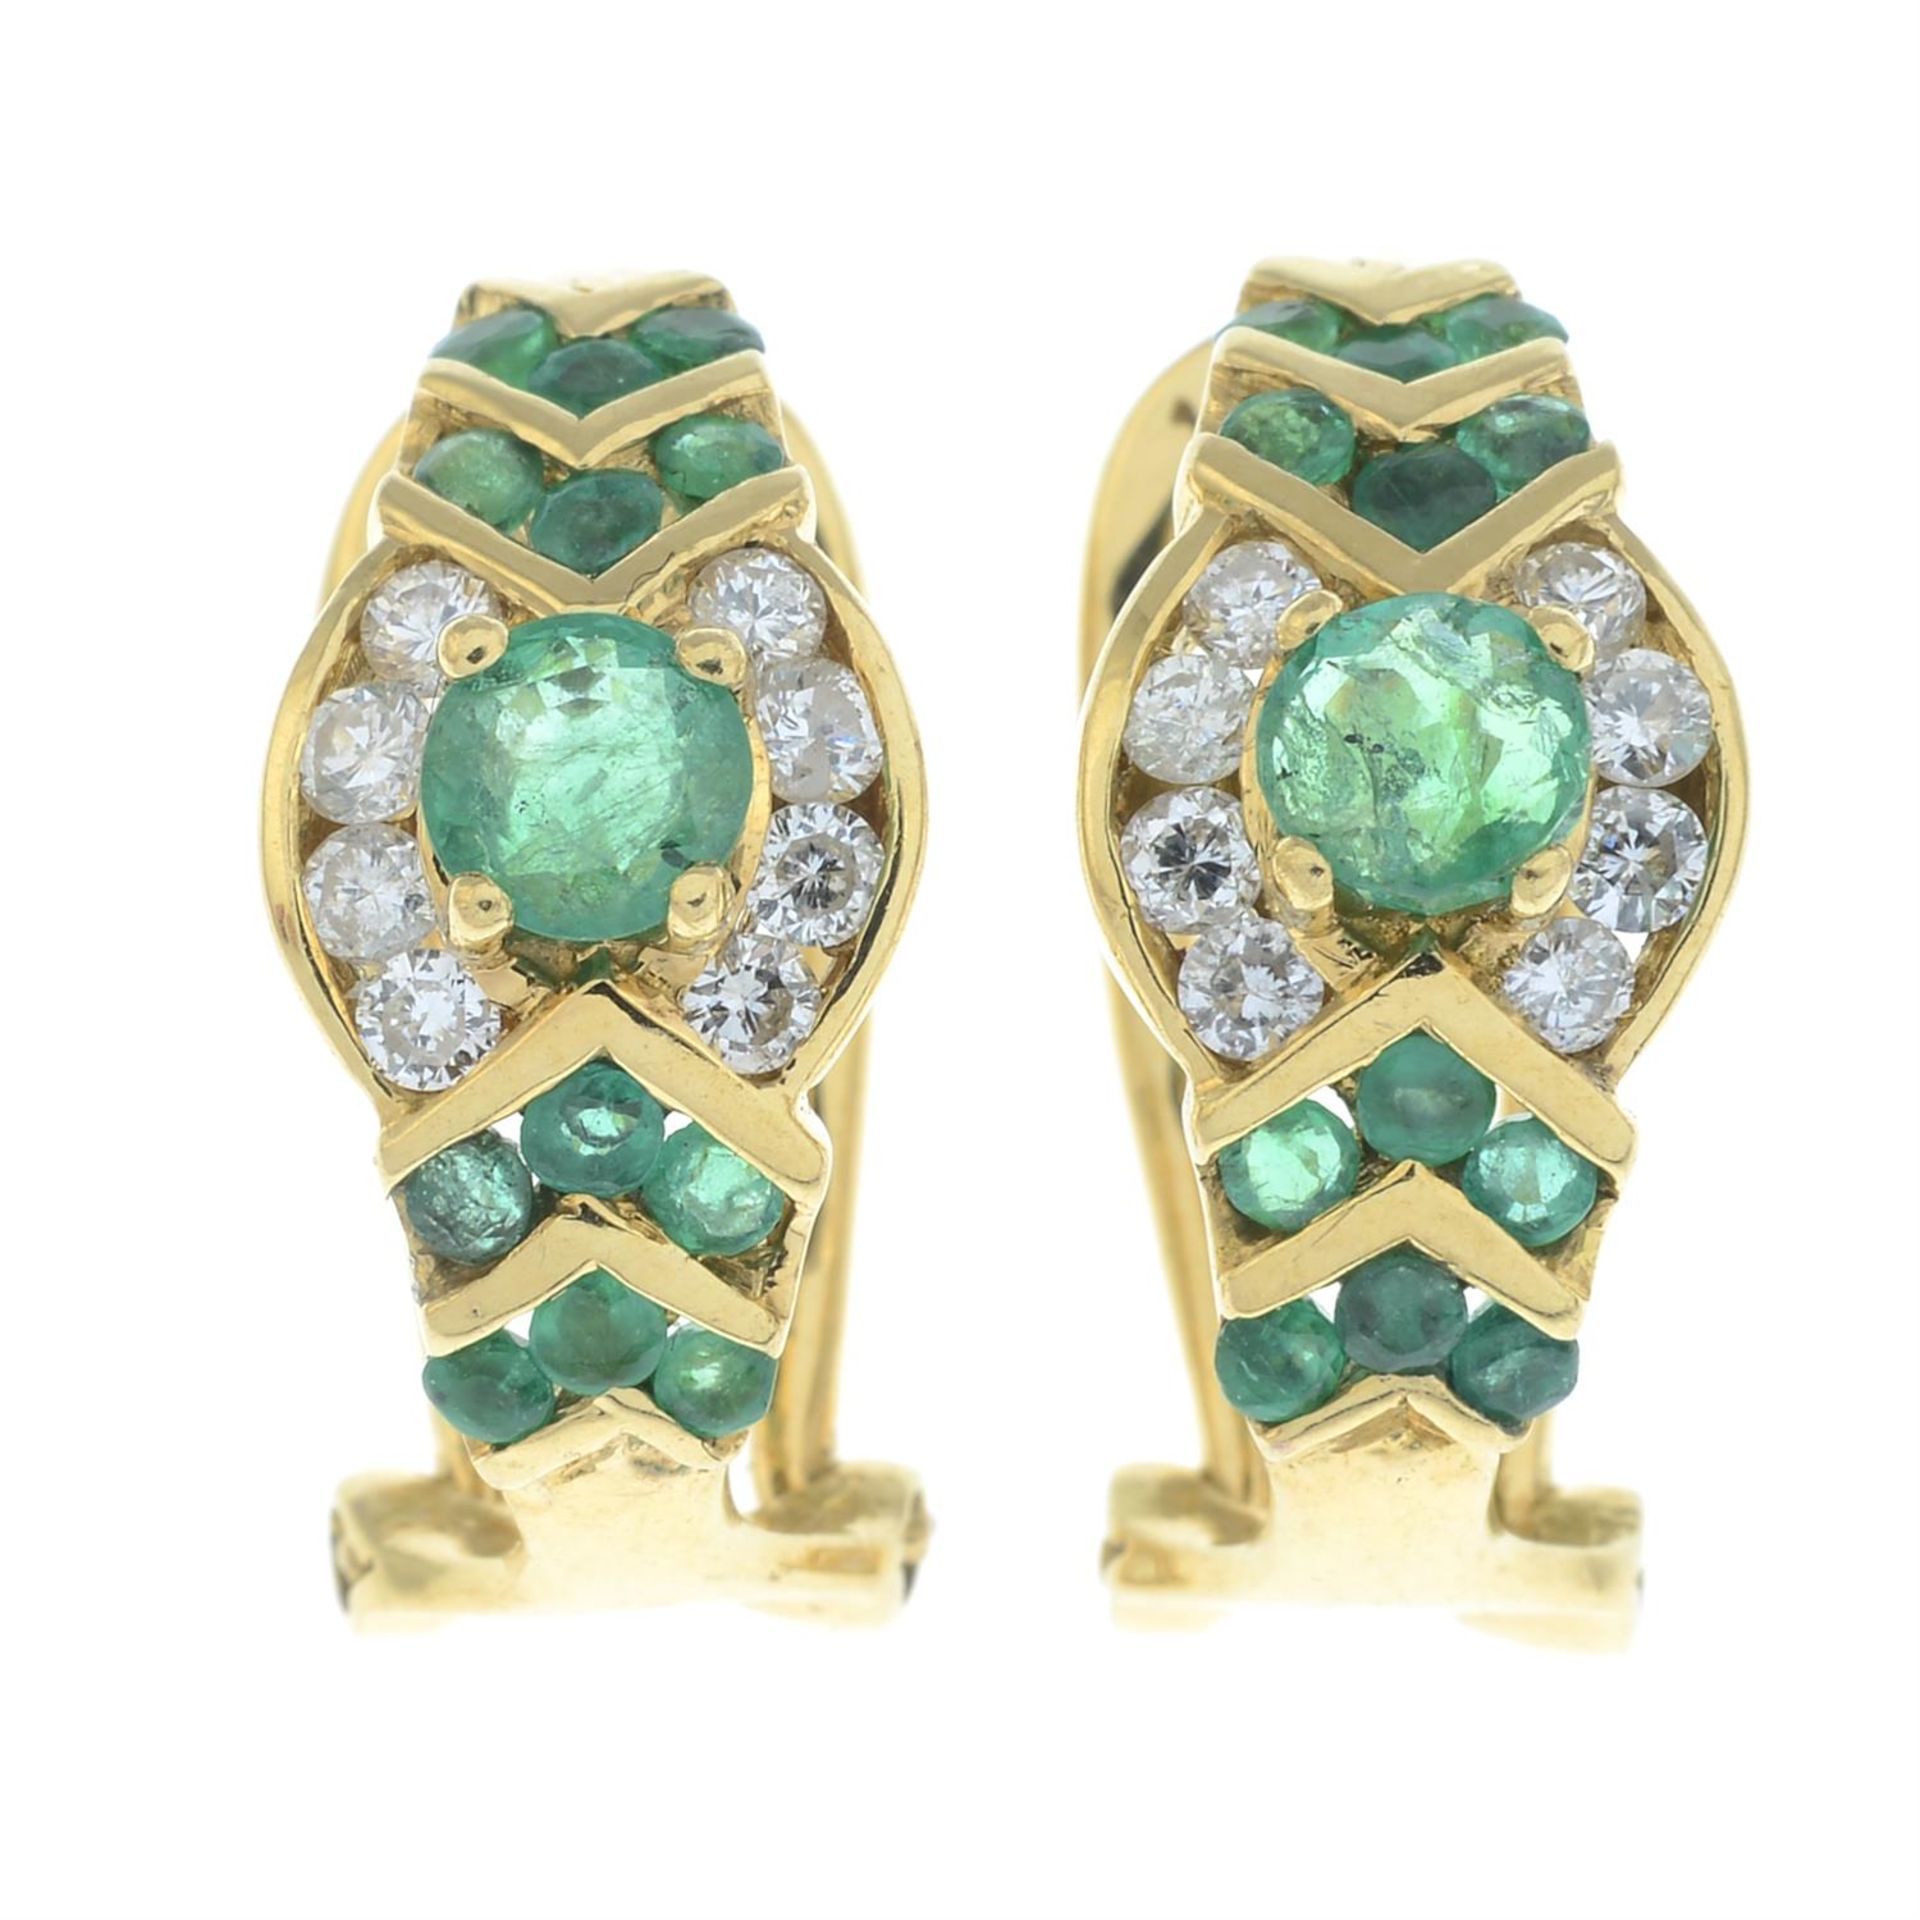 A pair of 18ct gold round-shape emerald and brilliant-cut diamond hinge-back stud earrings.